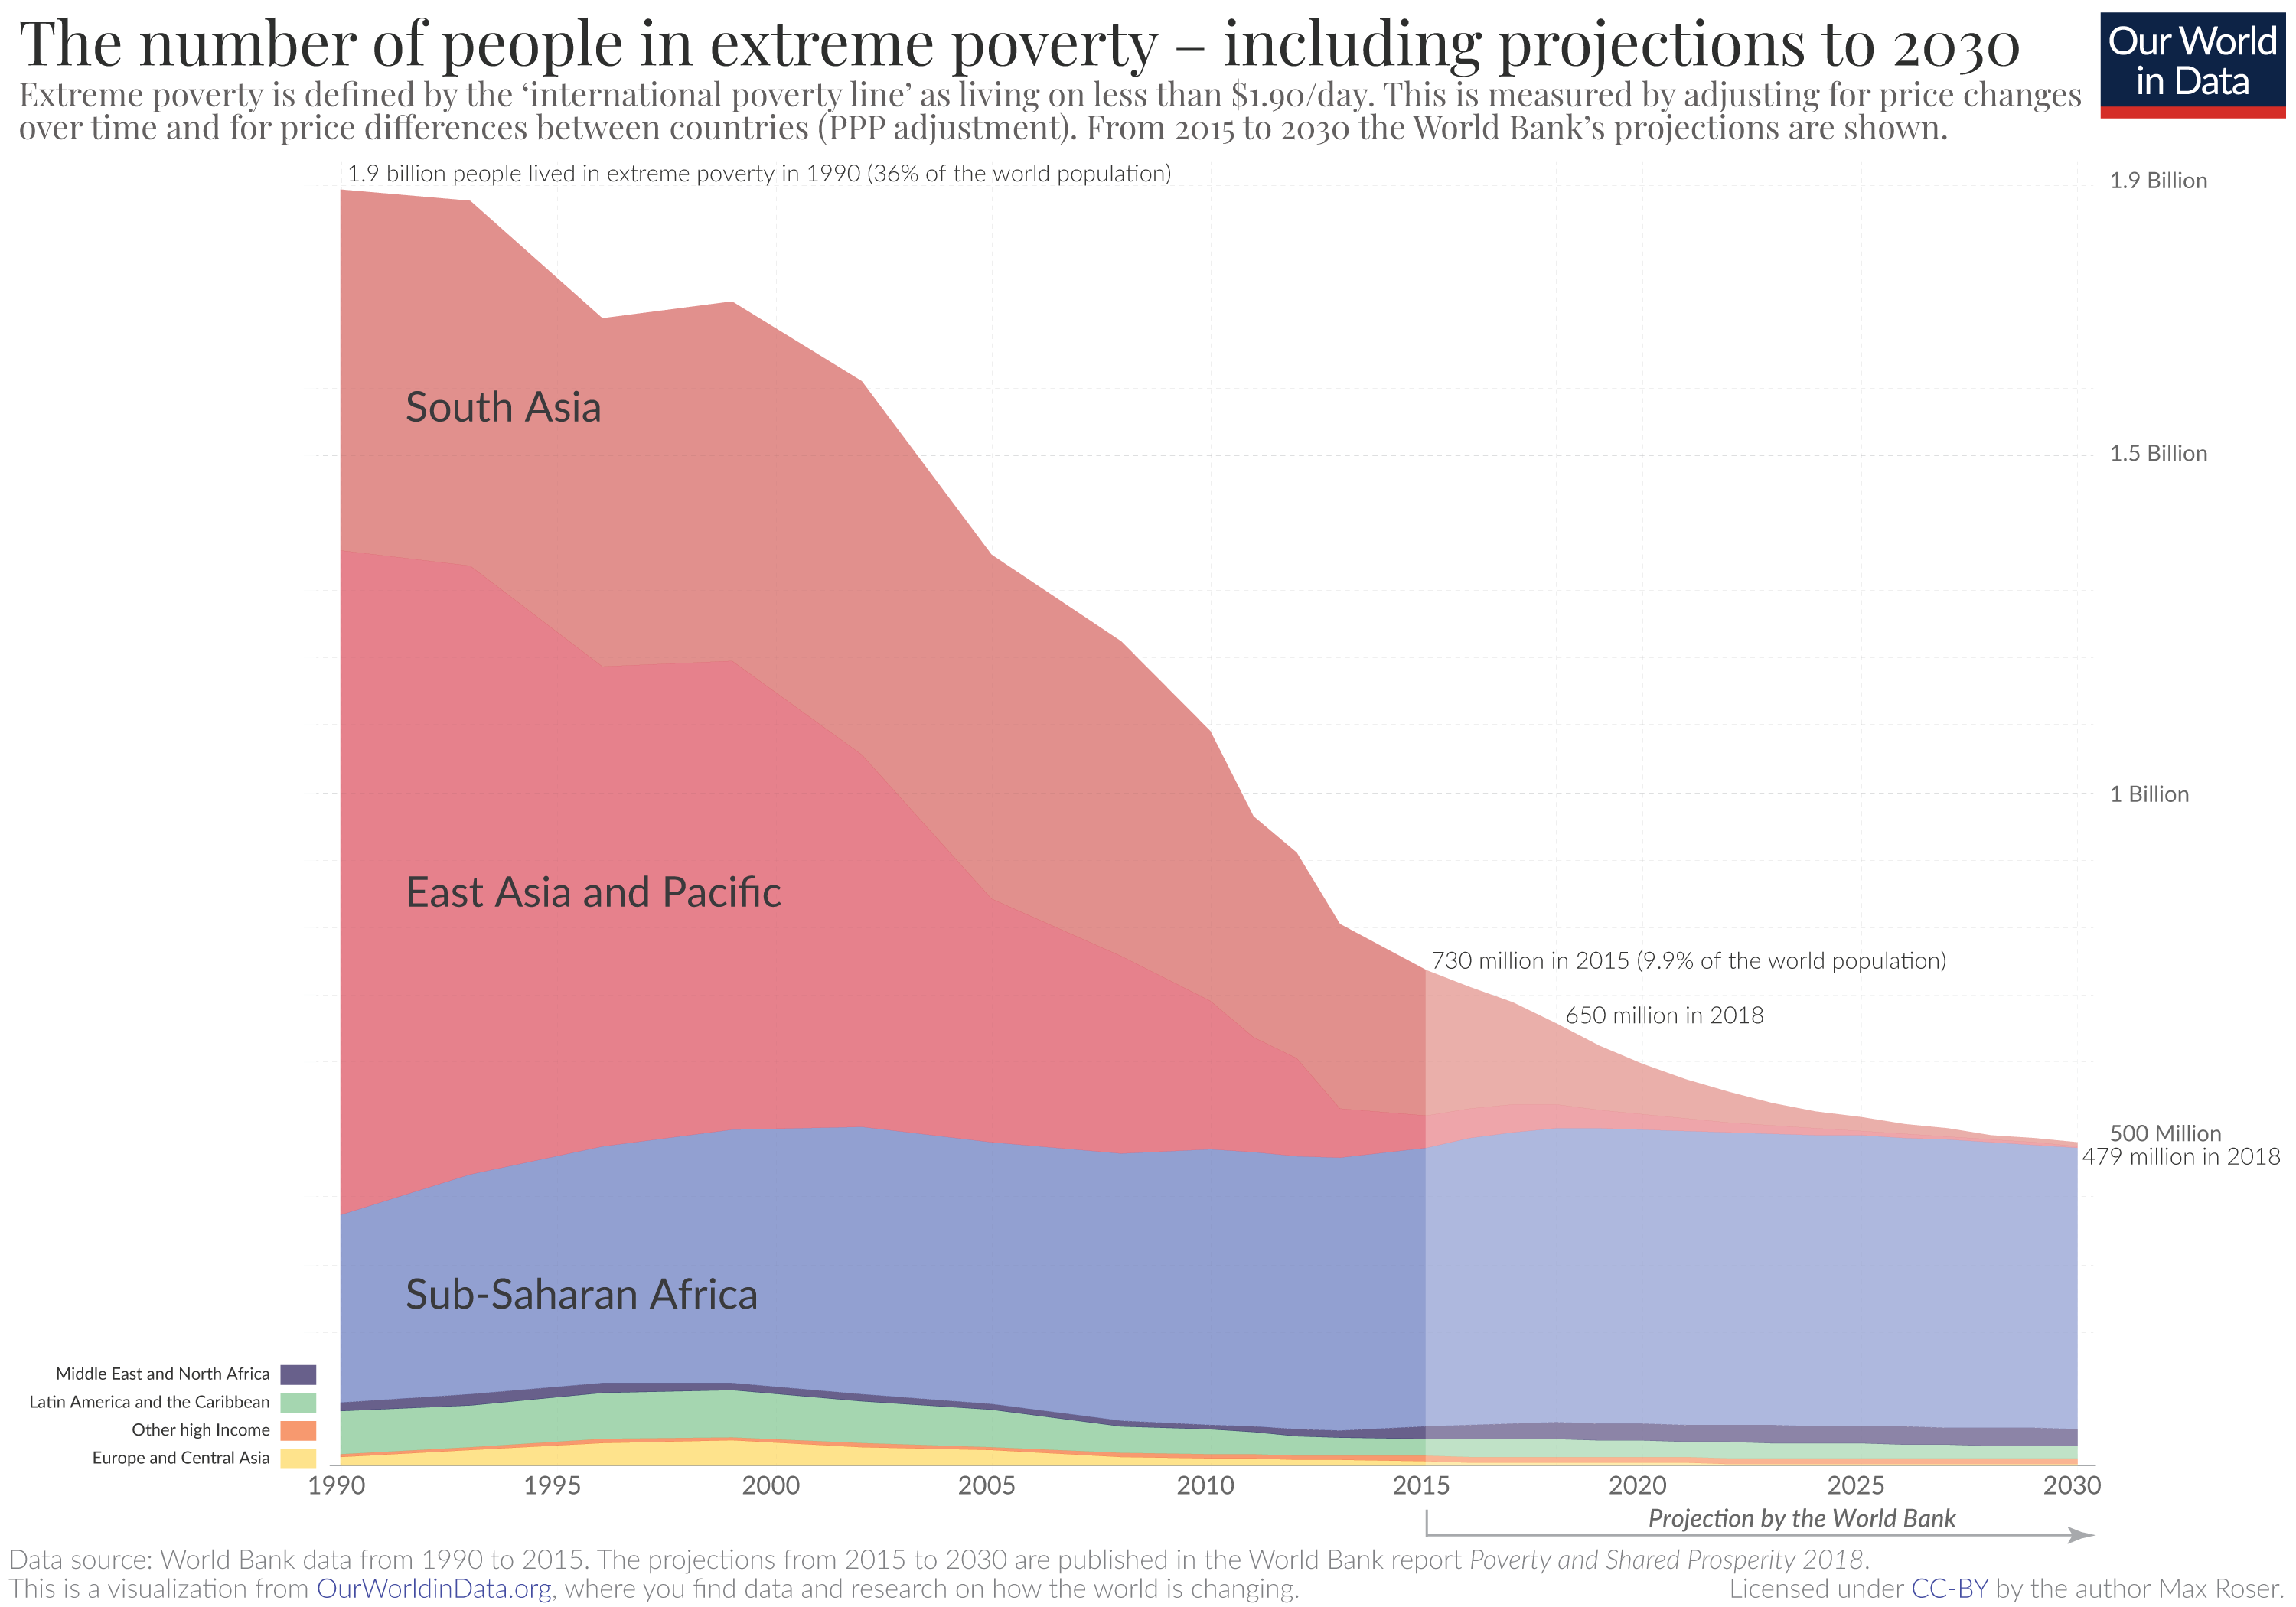 Extreme-Poverty-projection-by-the-World-